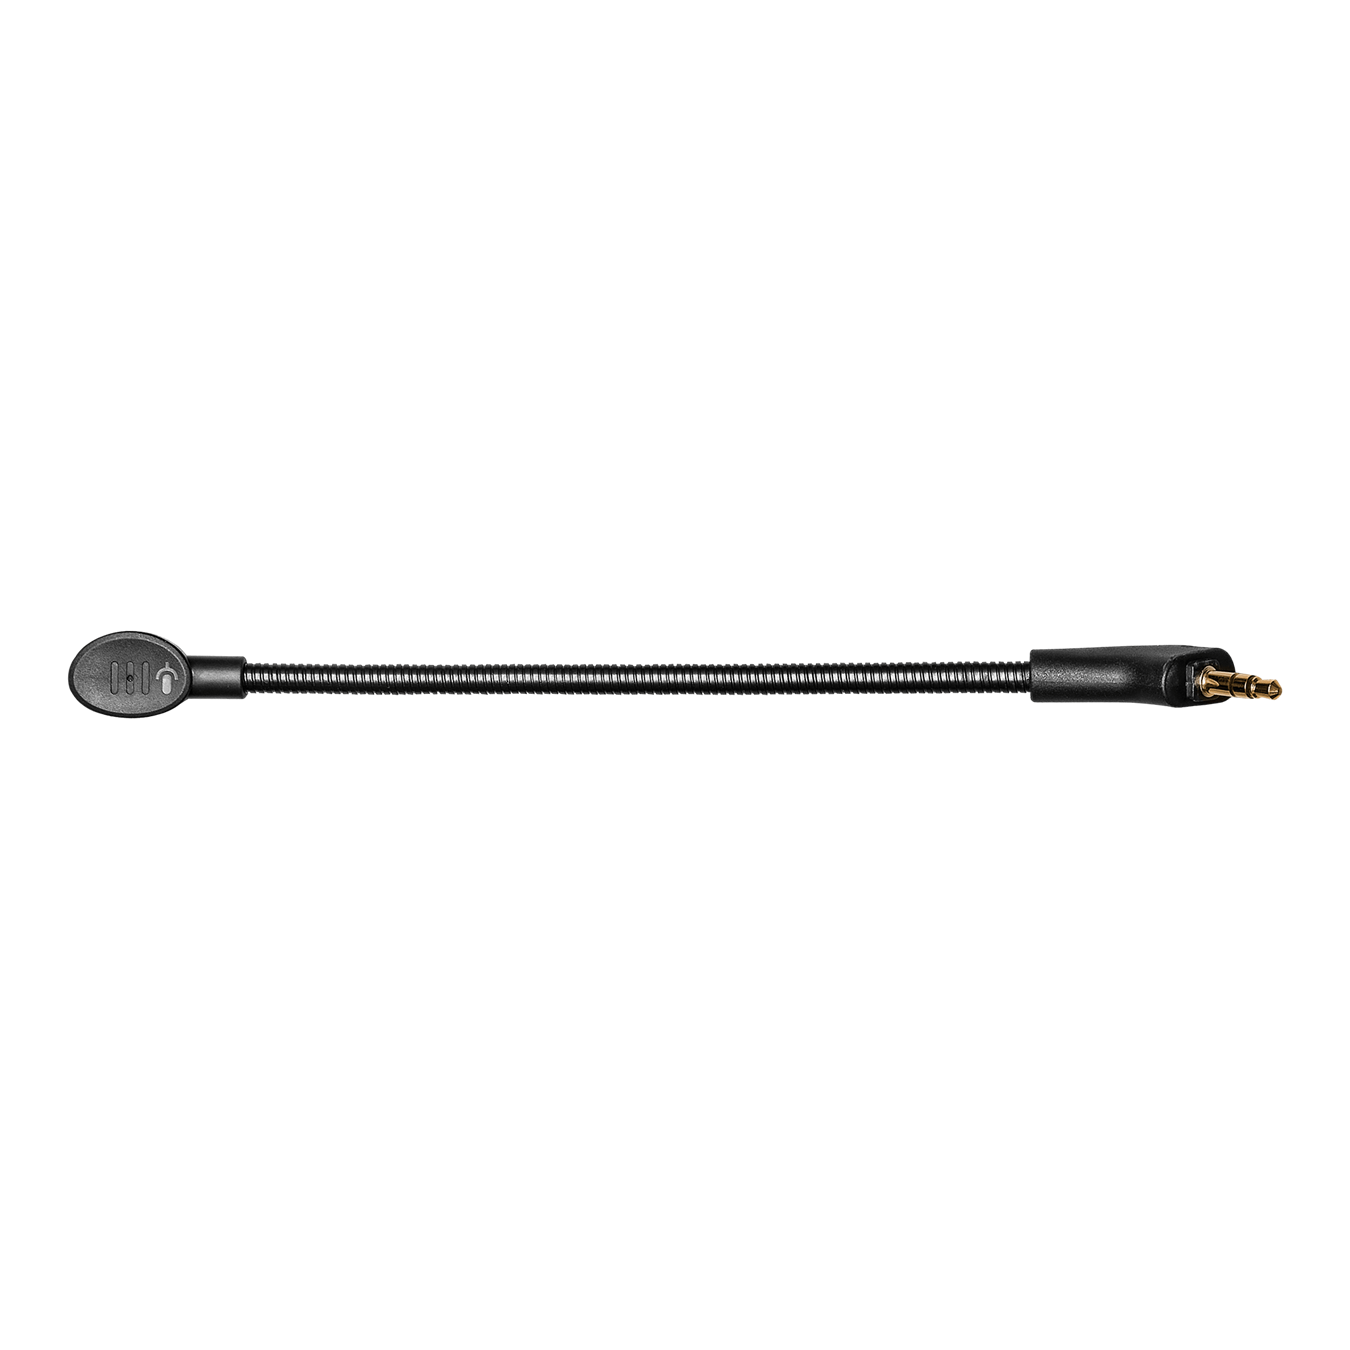 Detachable Boom Mic - Omnidirectional microphone delivers quality comms with minimal noise, ideal for gaming or for meetings while working from home